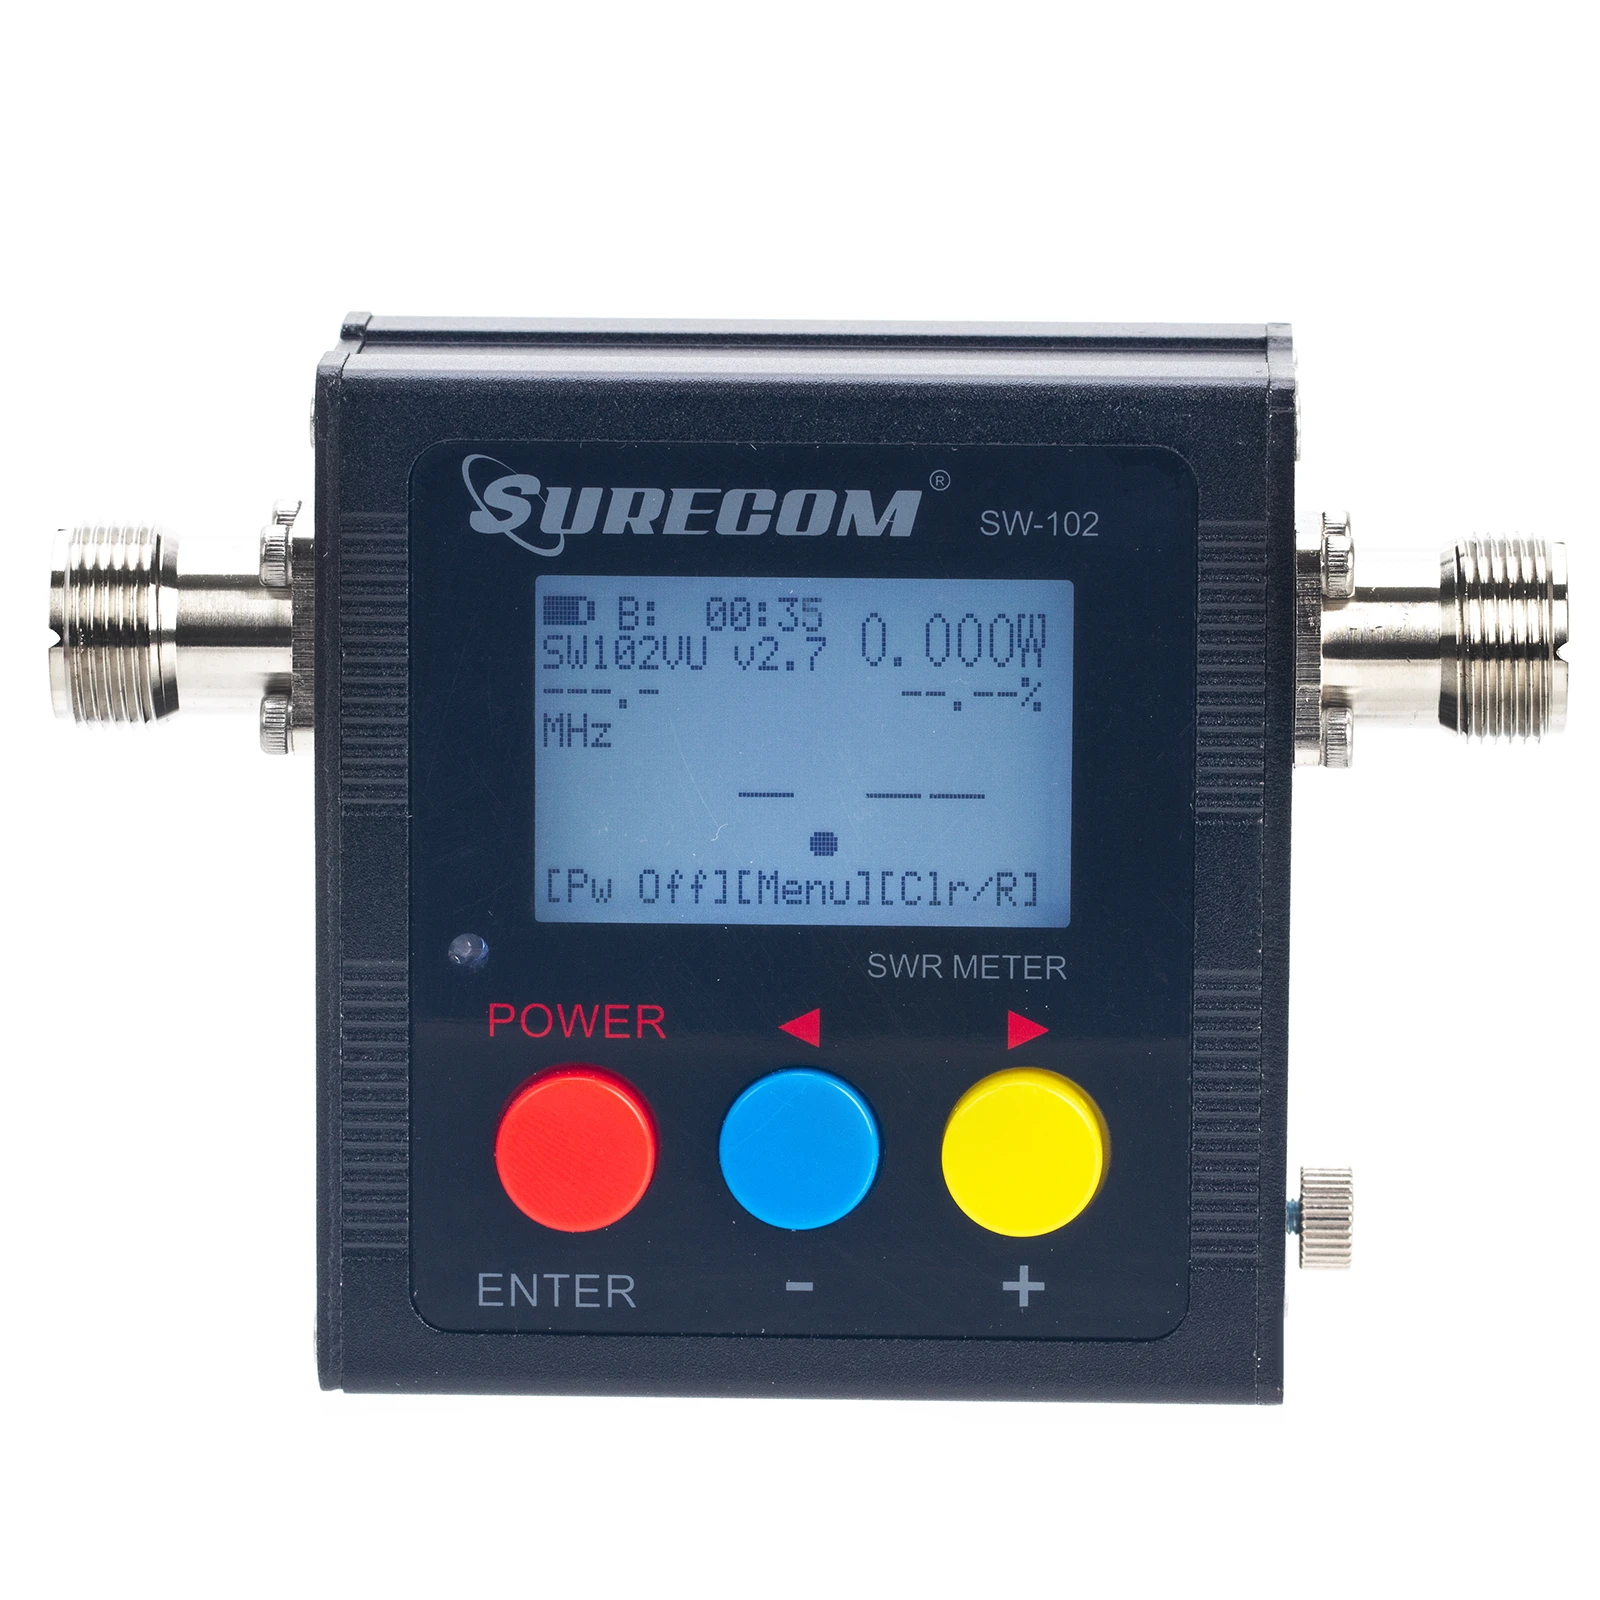 Intercom Standing Wave Meter For Two Way Radio For SURECOM SW-102 meter 125-520 Mhz Digital VHF/UHF Power & SWR Meter SW102